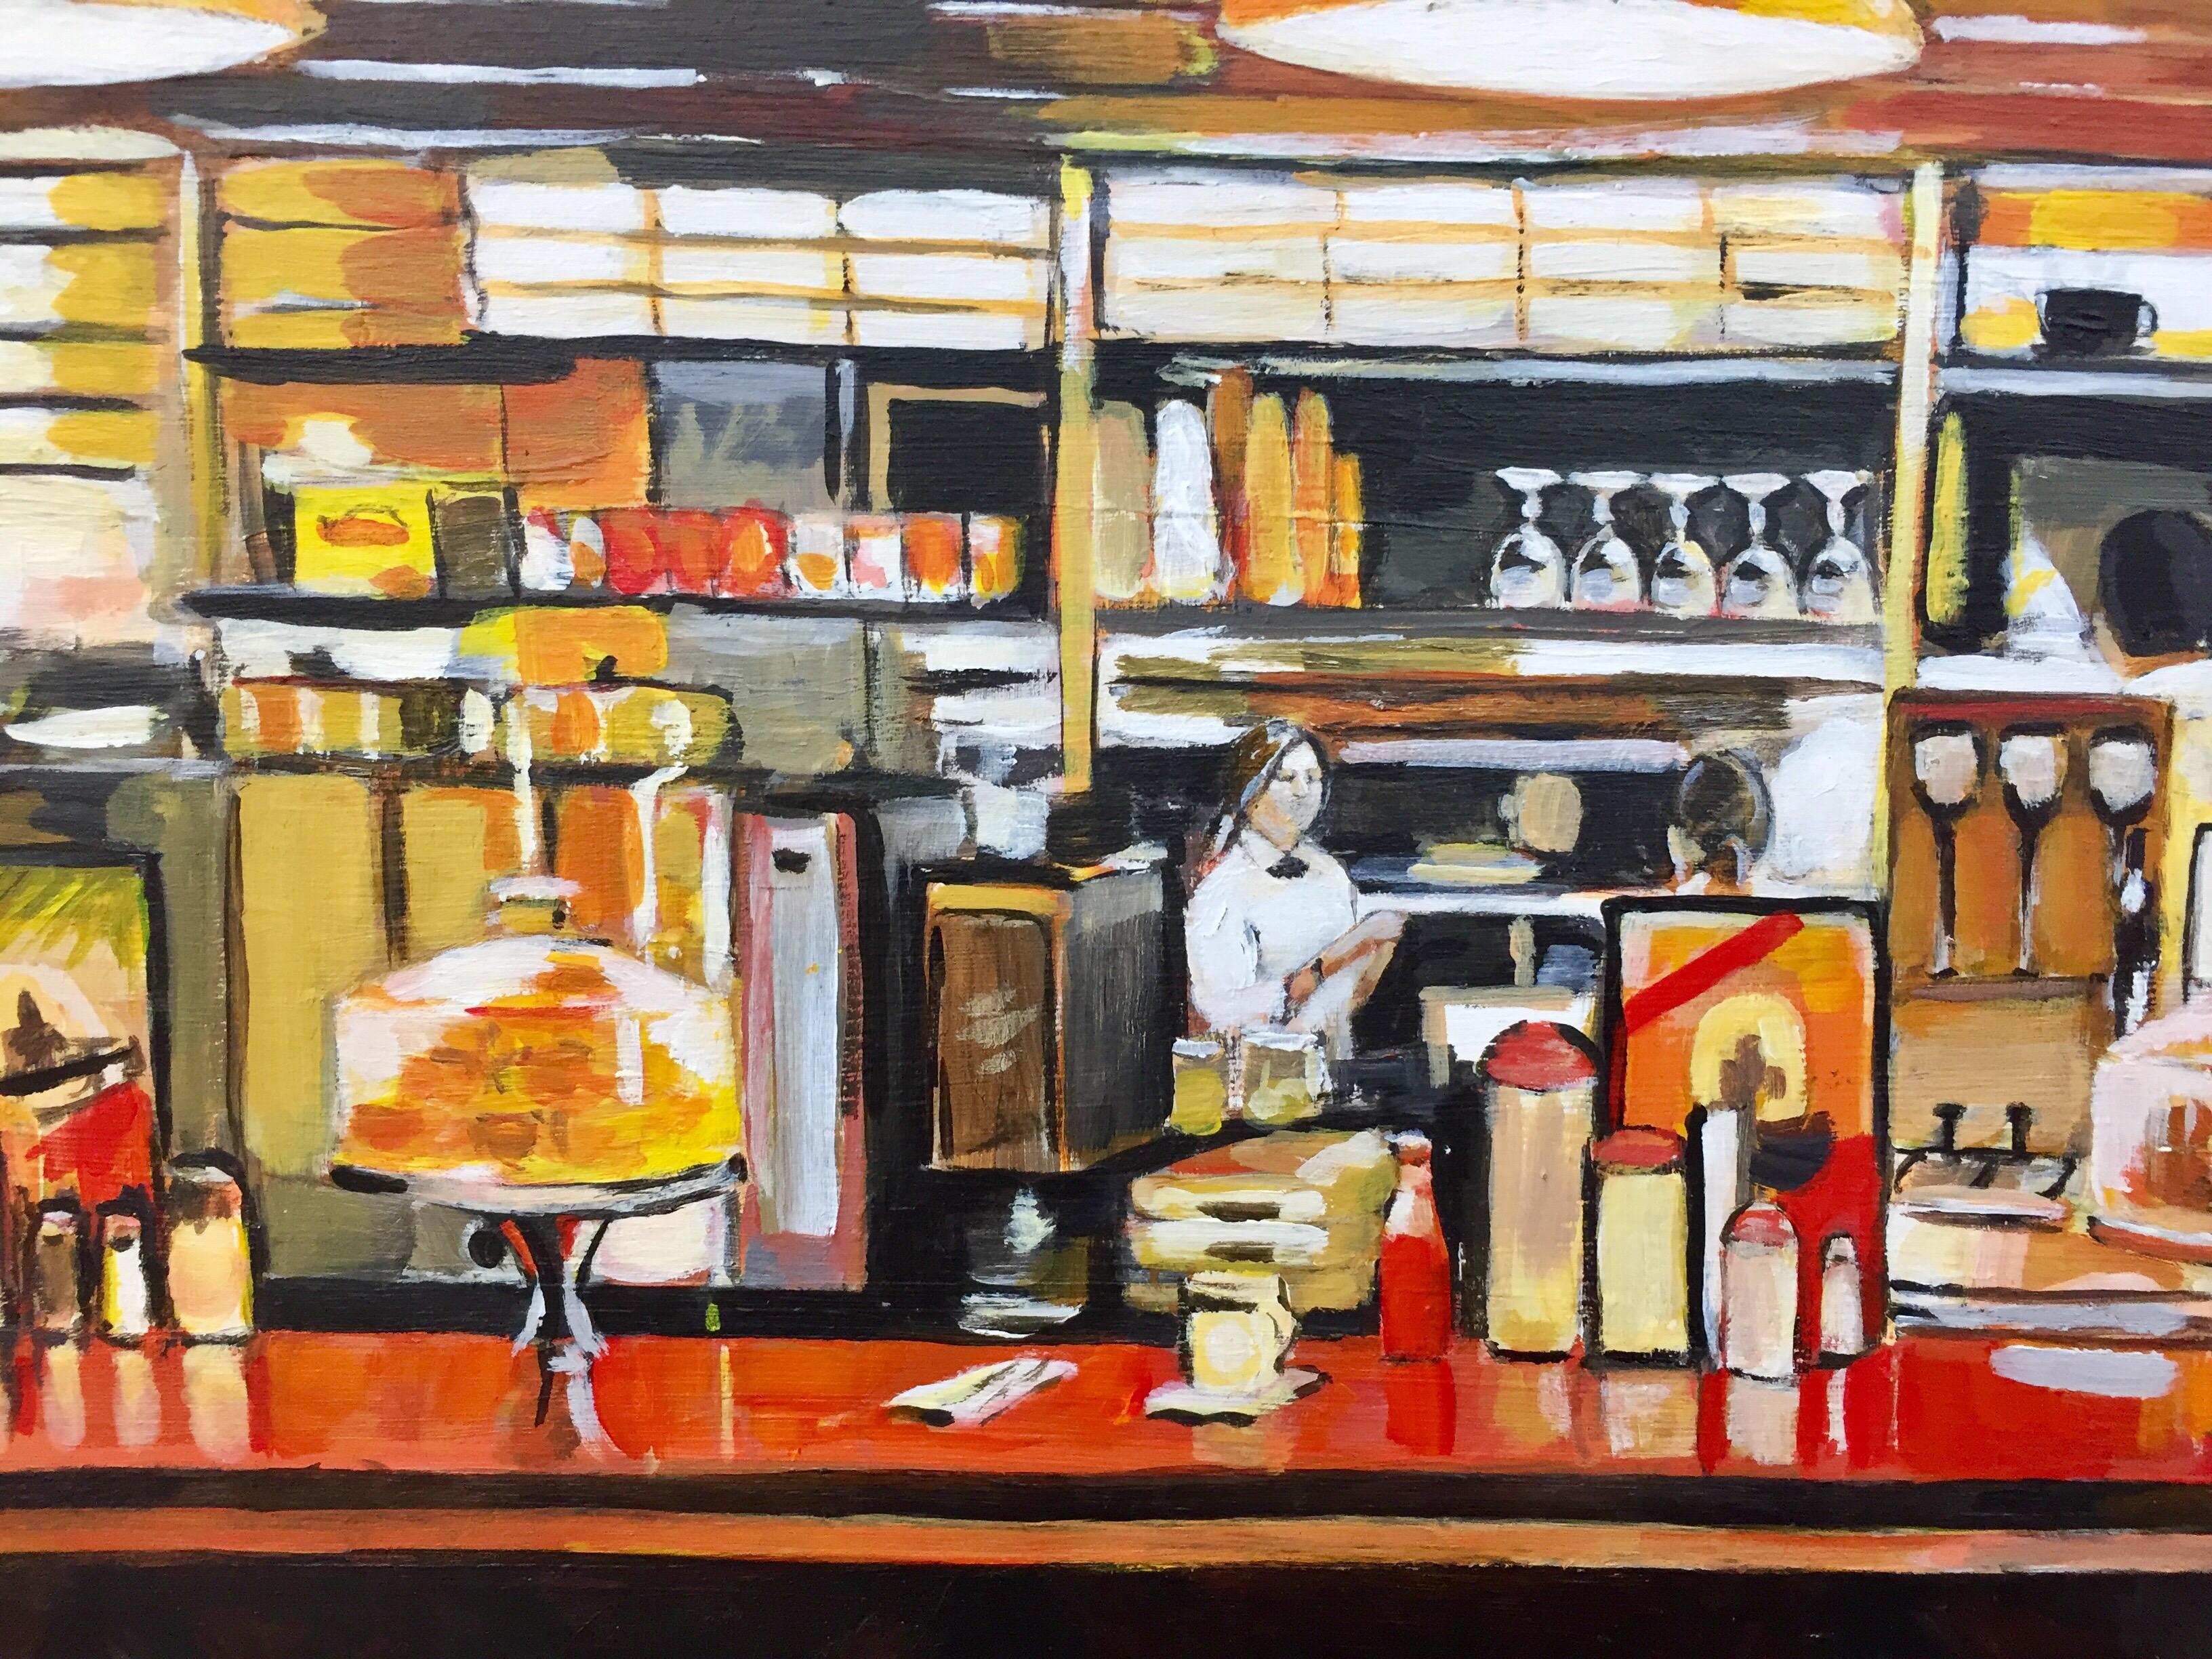 American Diner Still Life Painting by Leading British Urban Landscape Artist - Brown Interior Painting by Angela Wakefield